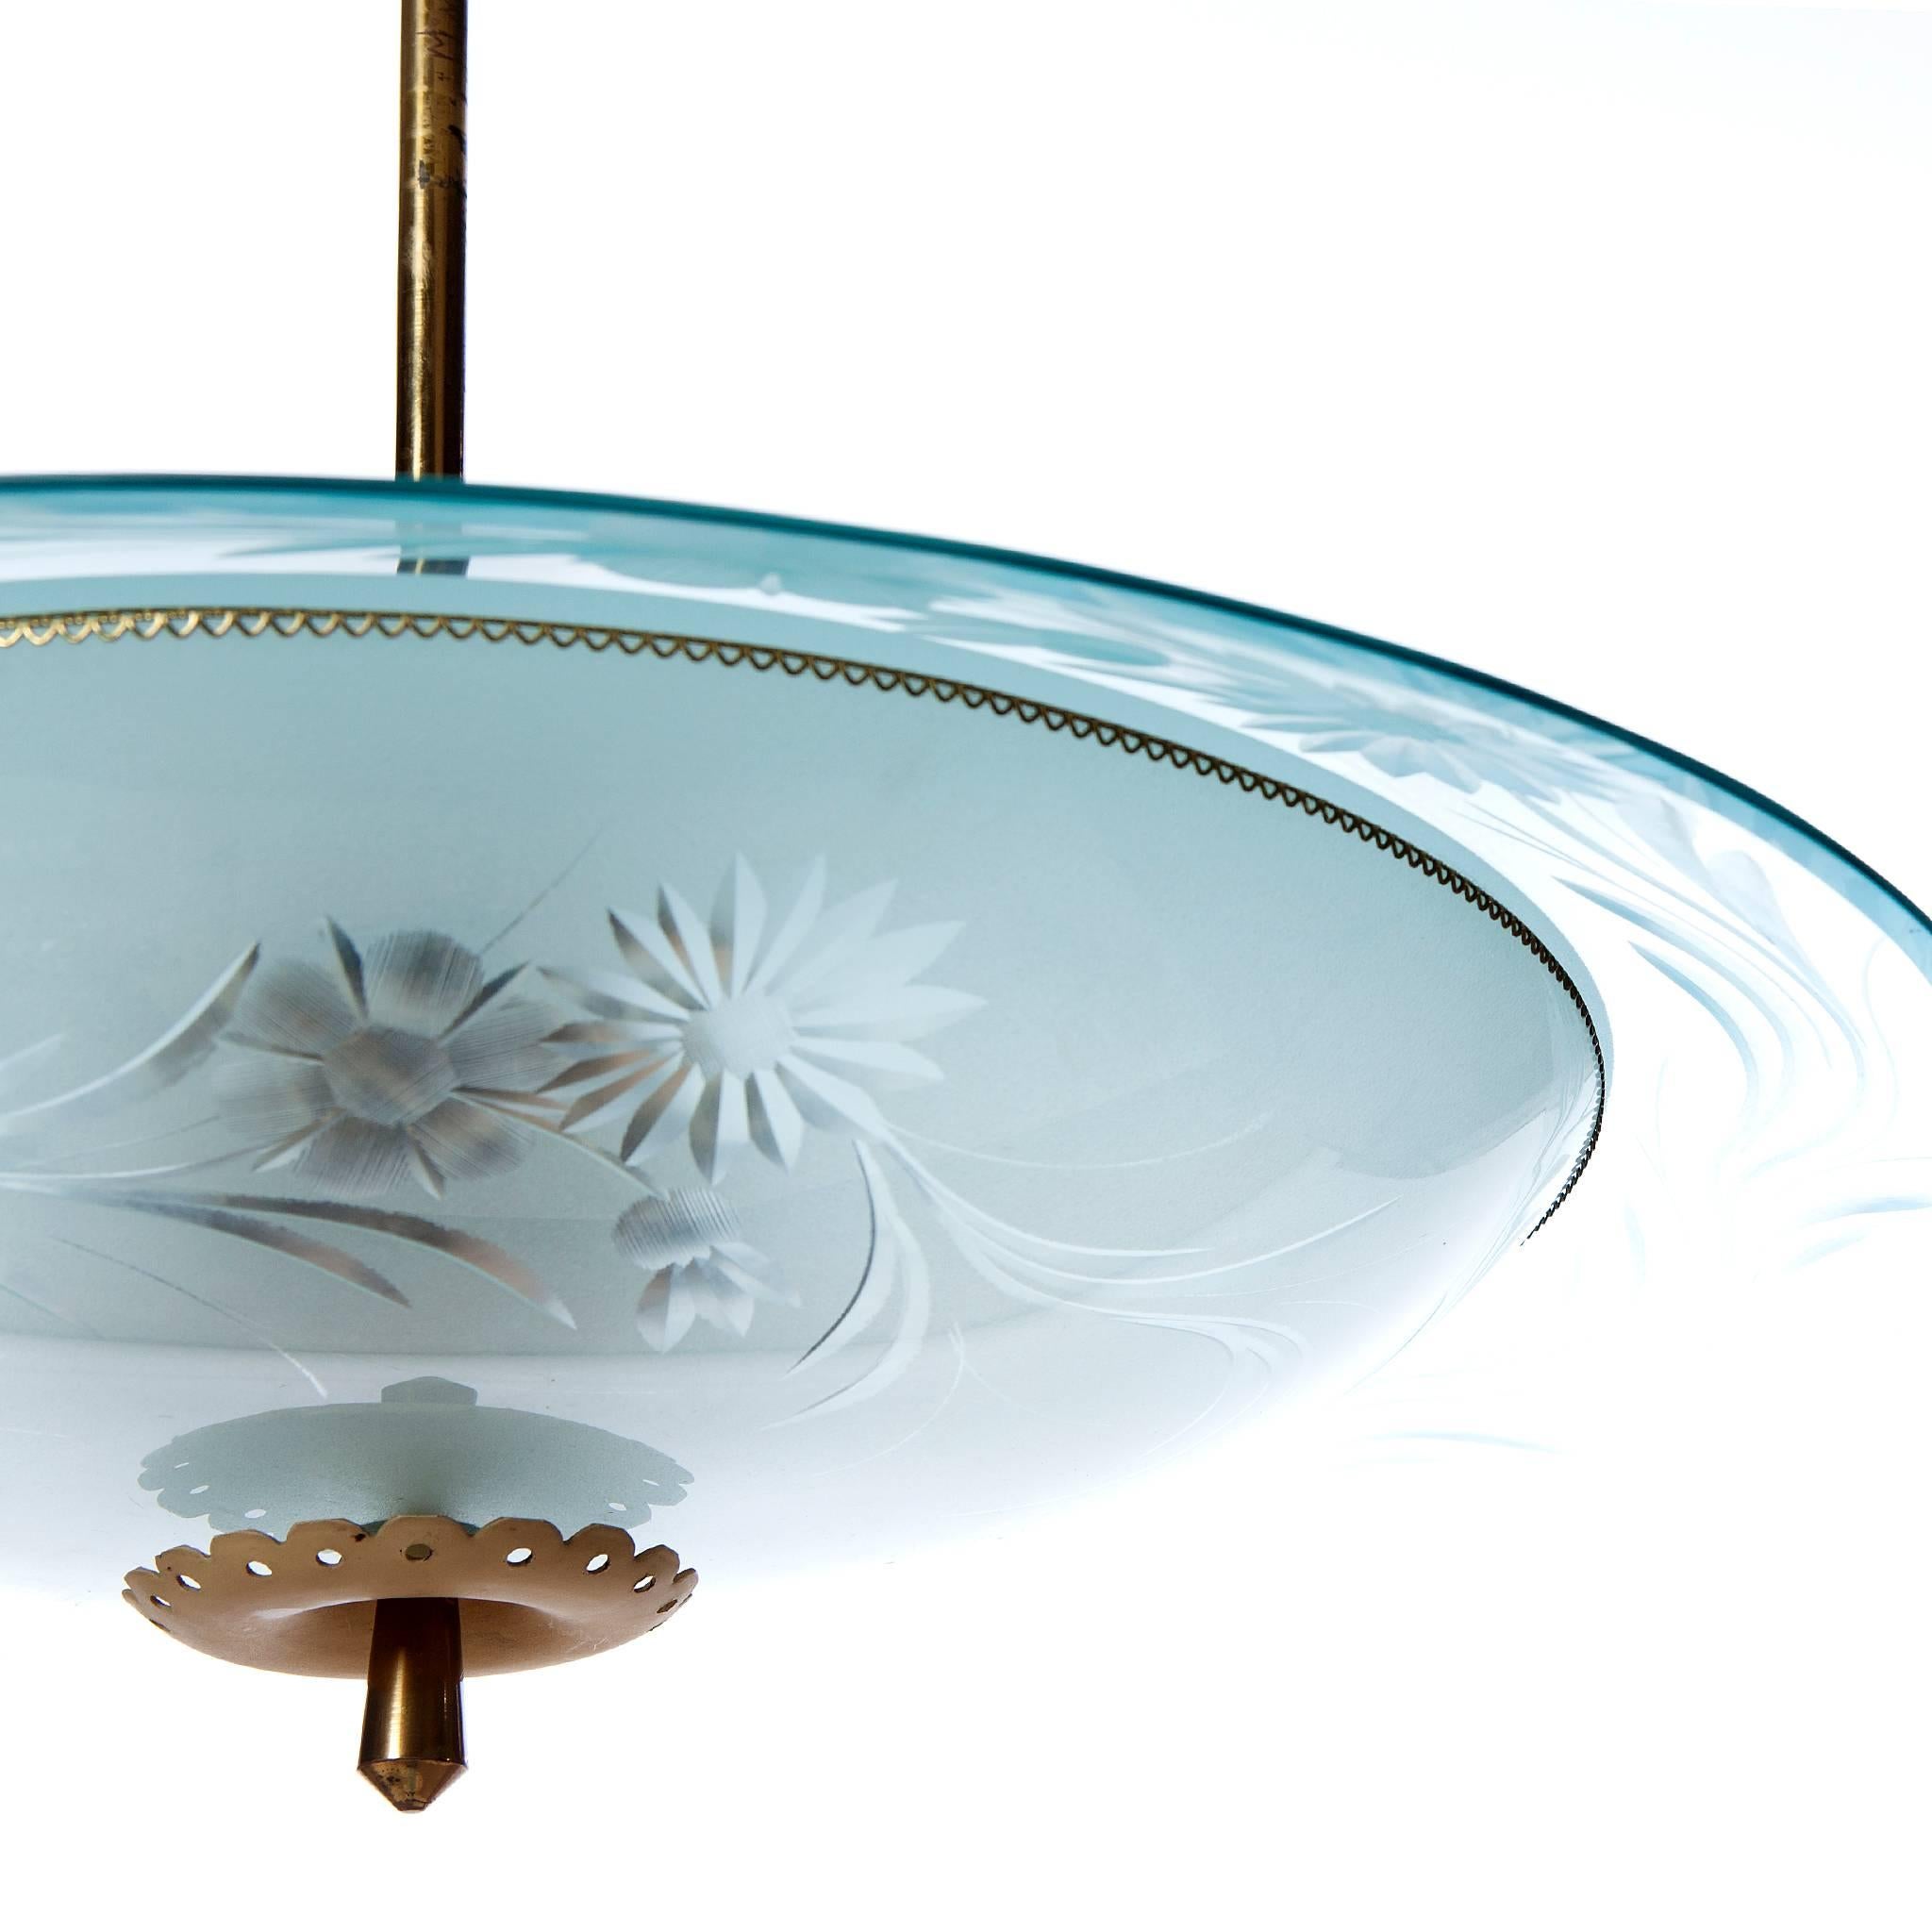 Elegant 1940s pendant curved glass decorated with floral motifs. It holds six lights and is in excellent condition.